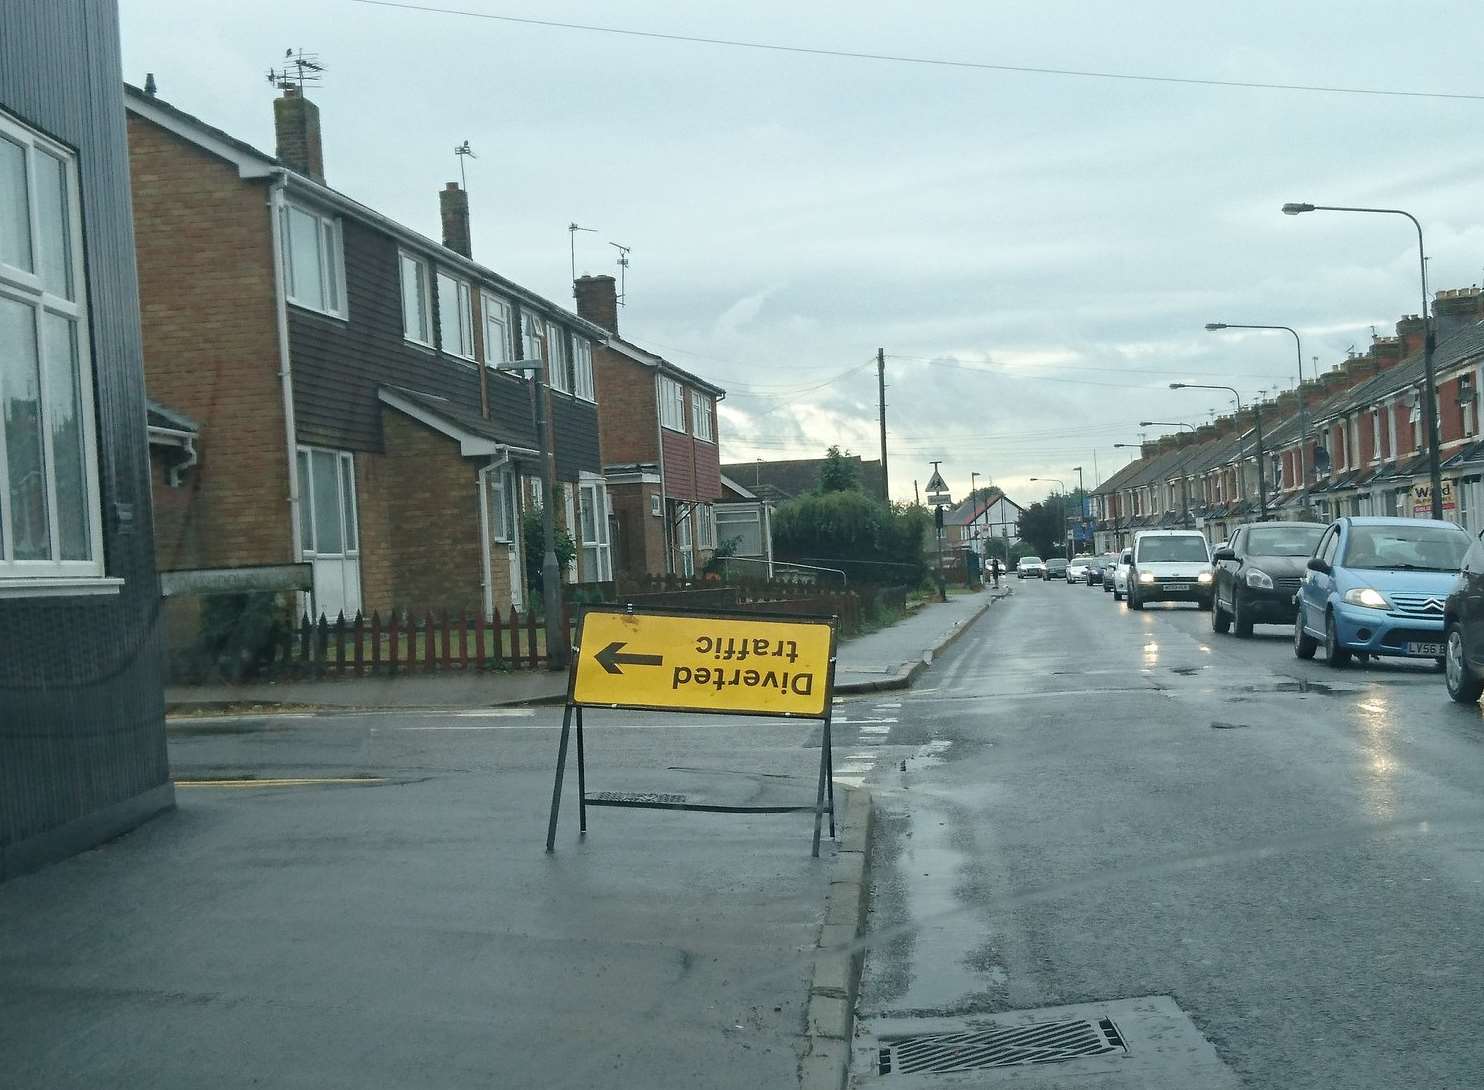 The sign is at the junction of Queenborough Road and Southdown Road